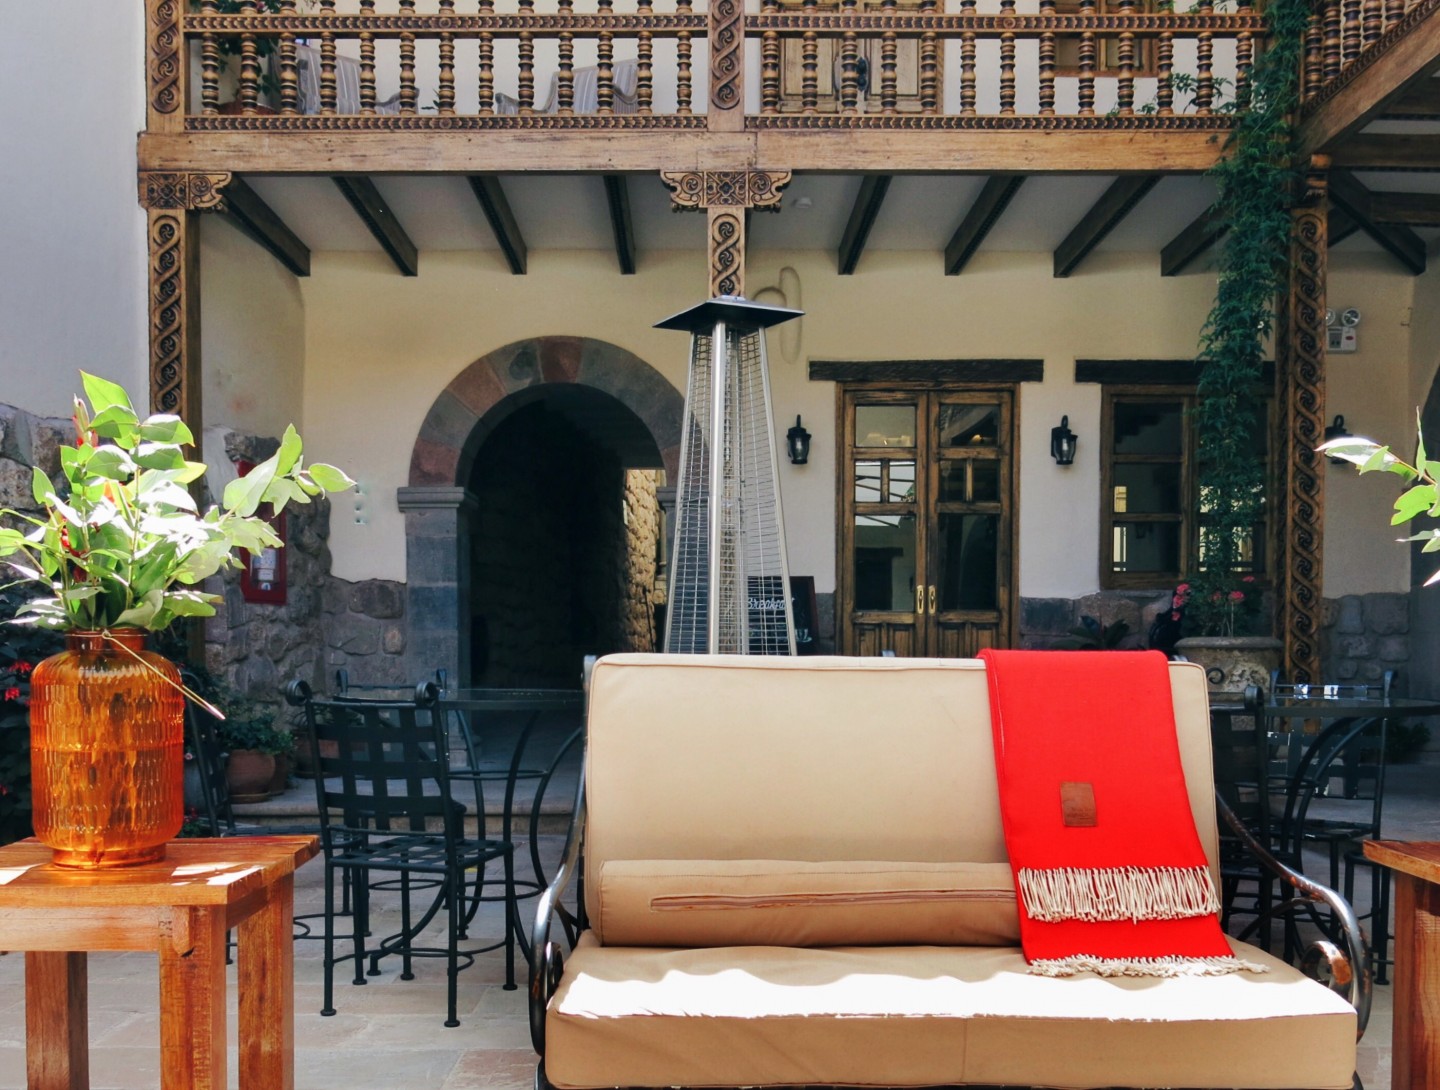 Where To Stay In Cusco, Peru. Including budget hostel and luxury hotel options!